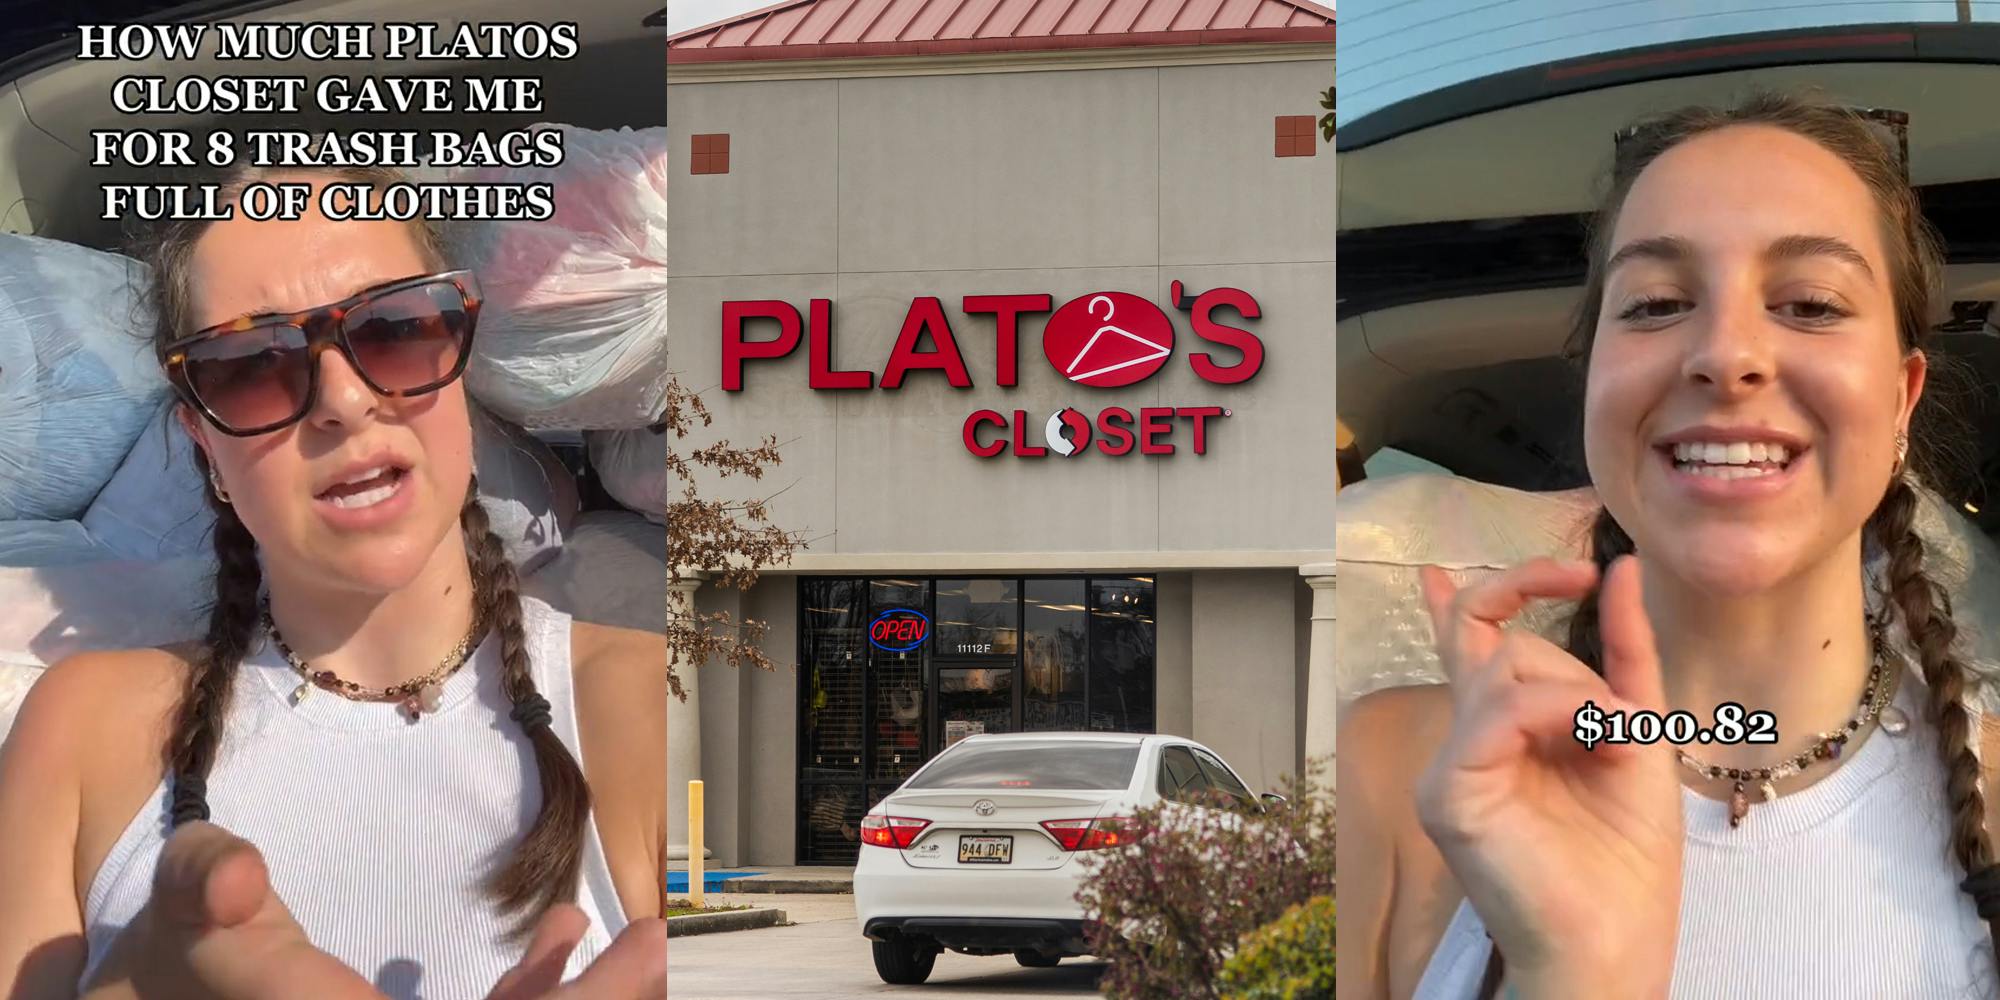 Plato's Closet customer speaking with caption "HOW MUCH PLATOS CLOSET GAVE ME FOR 8 TRASH BAGS FULL OF CLOTHES" (l) Plato's Closet building with sign (c) Plato's Closet customer speaking with caption "$100.82" (r)